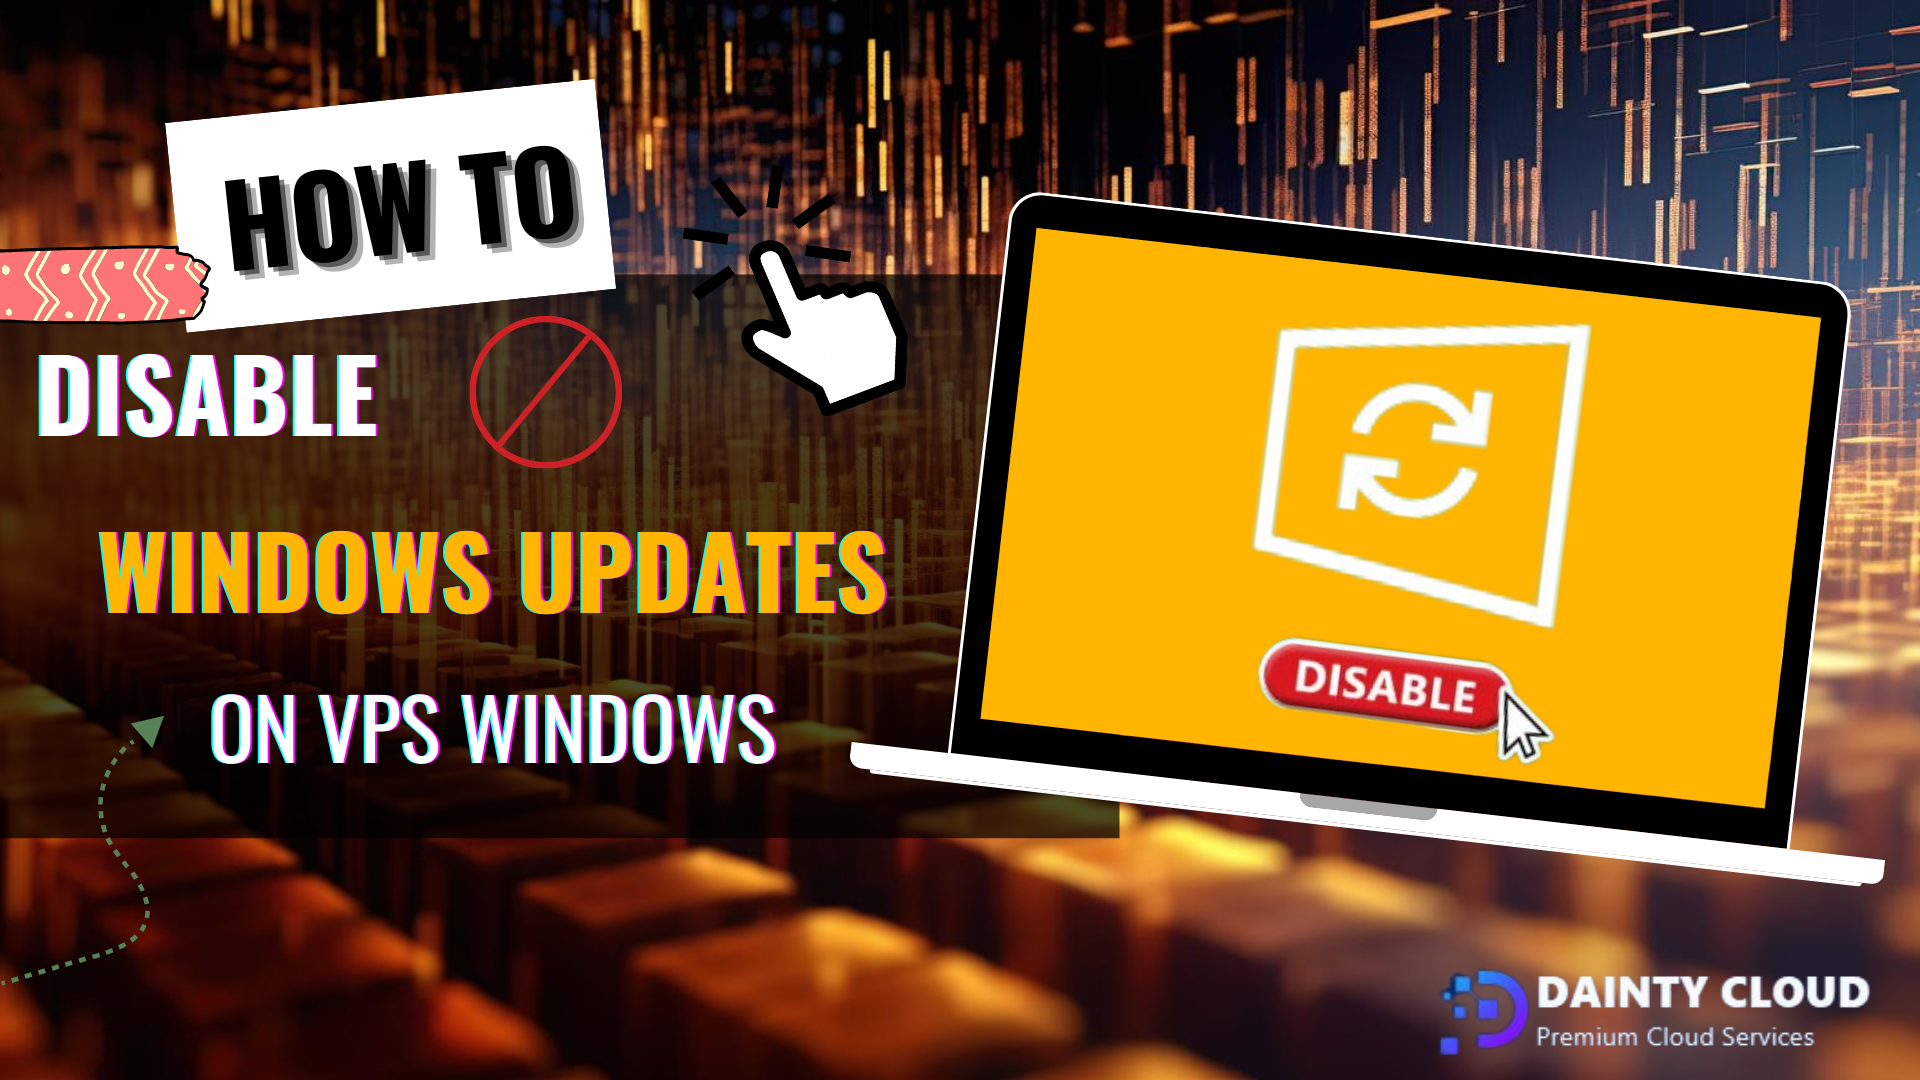 How to disable Windows Update on VPS Windows (Windows 7-8-10 and Windows Server)